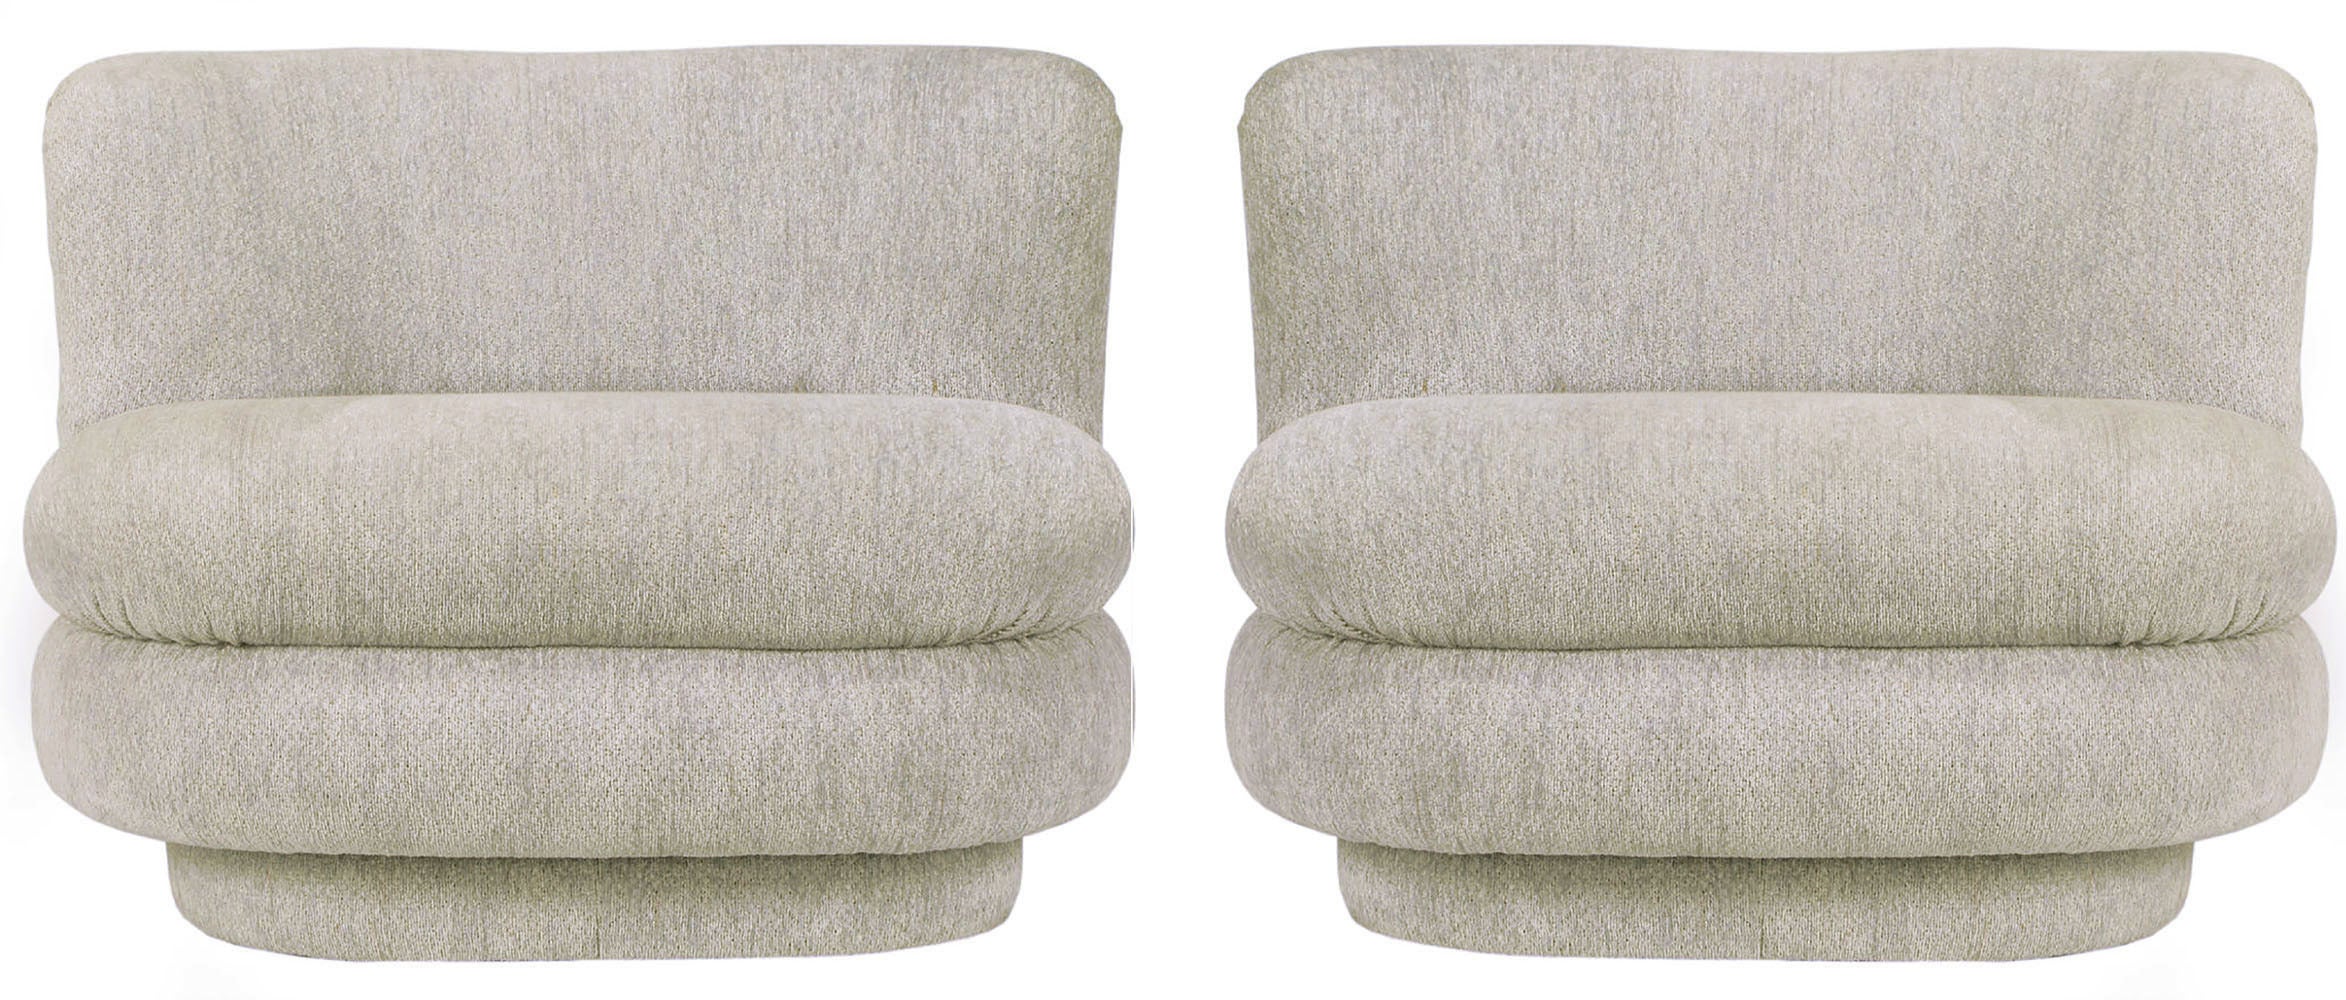 Pair of Art Deco Revival Dove Grey Chenille Slipper Chairs